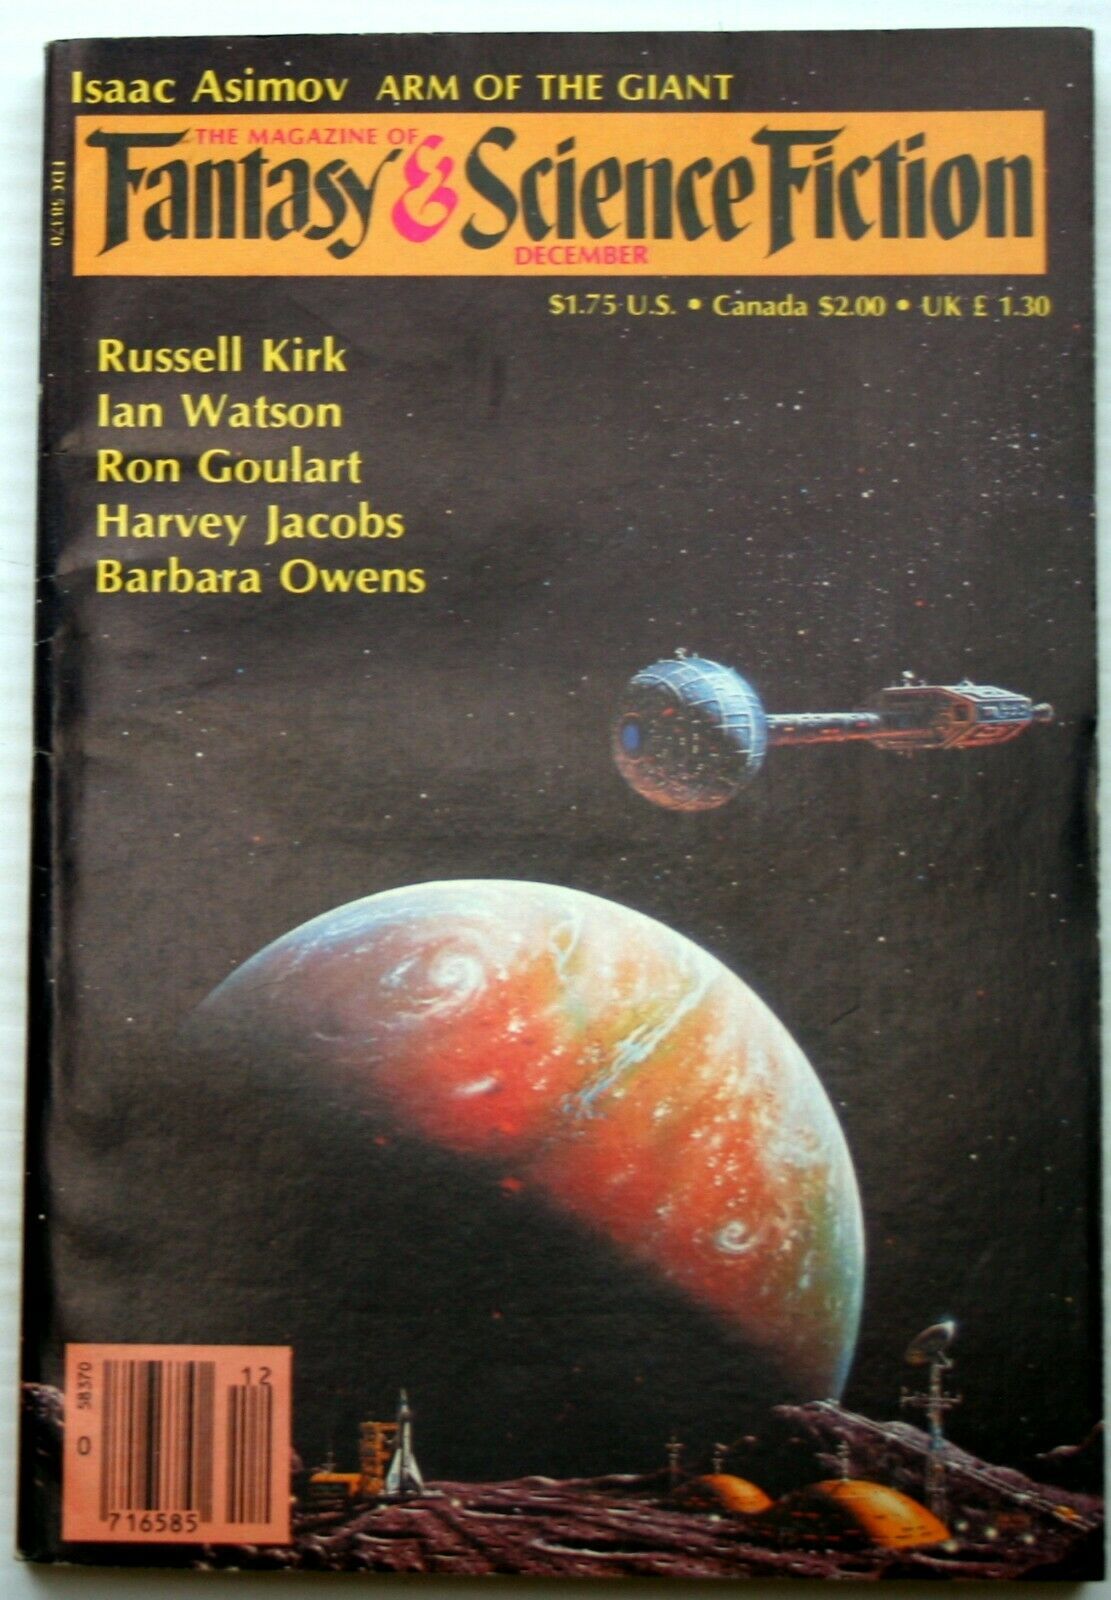 FANTASY & SCIENCE FICTION Magazine 12/1983 WATSON~KIRK~GOULART~JACOBS~OWENS~MAY